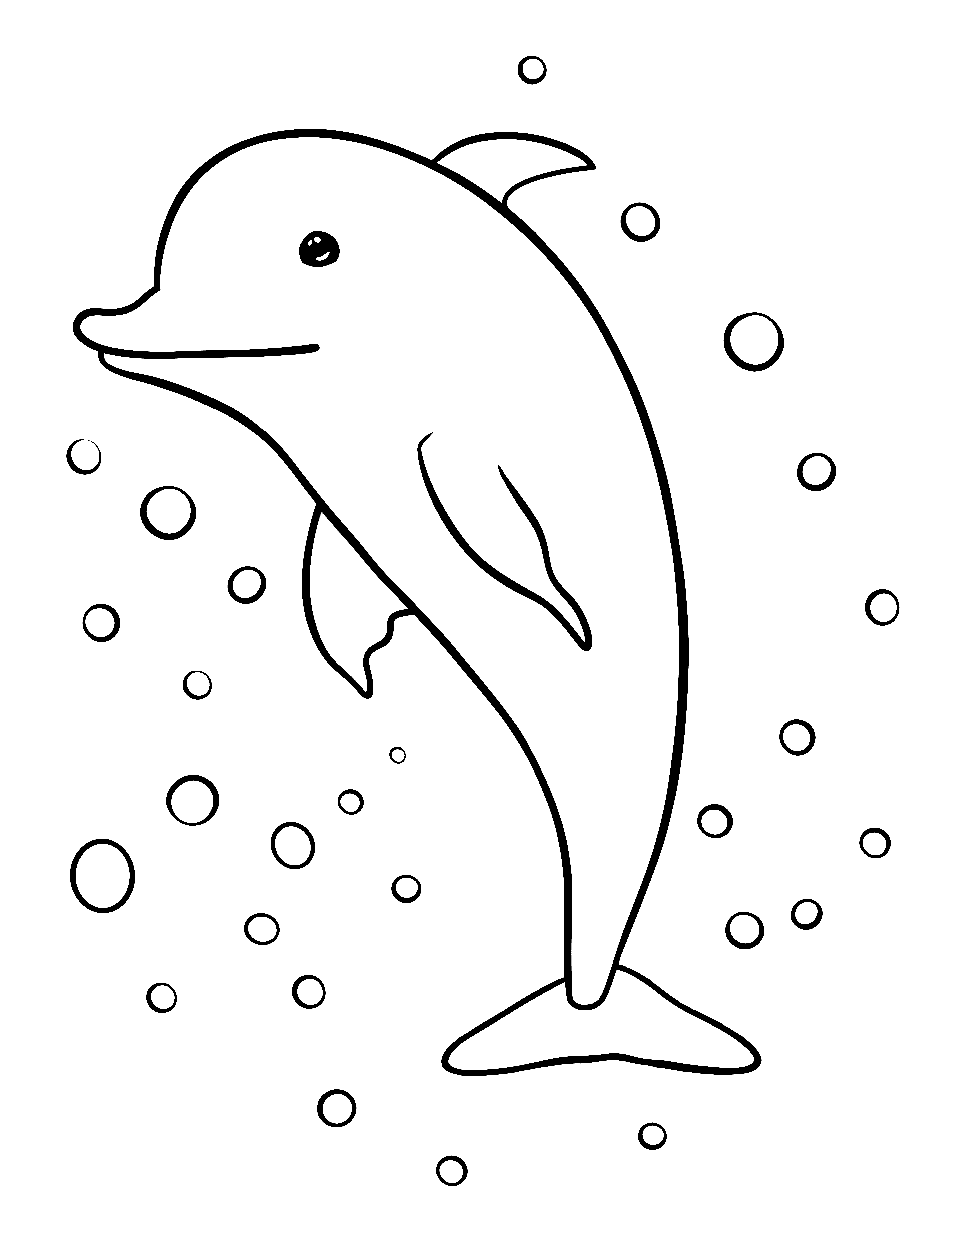 Cute Dolphin with Bubbles Coloring Page - A cute dolphin playfully interacting with gentle, floating bubbles under the calm ocean.